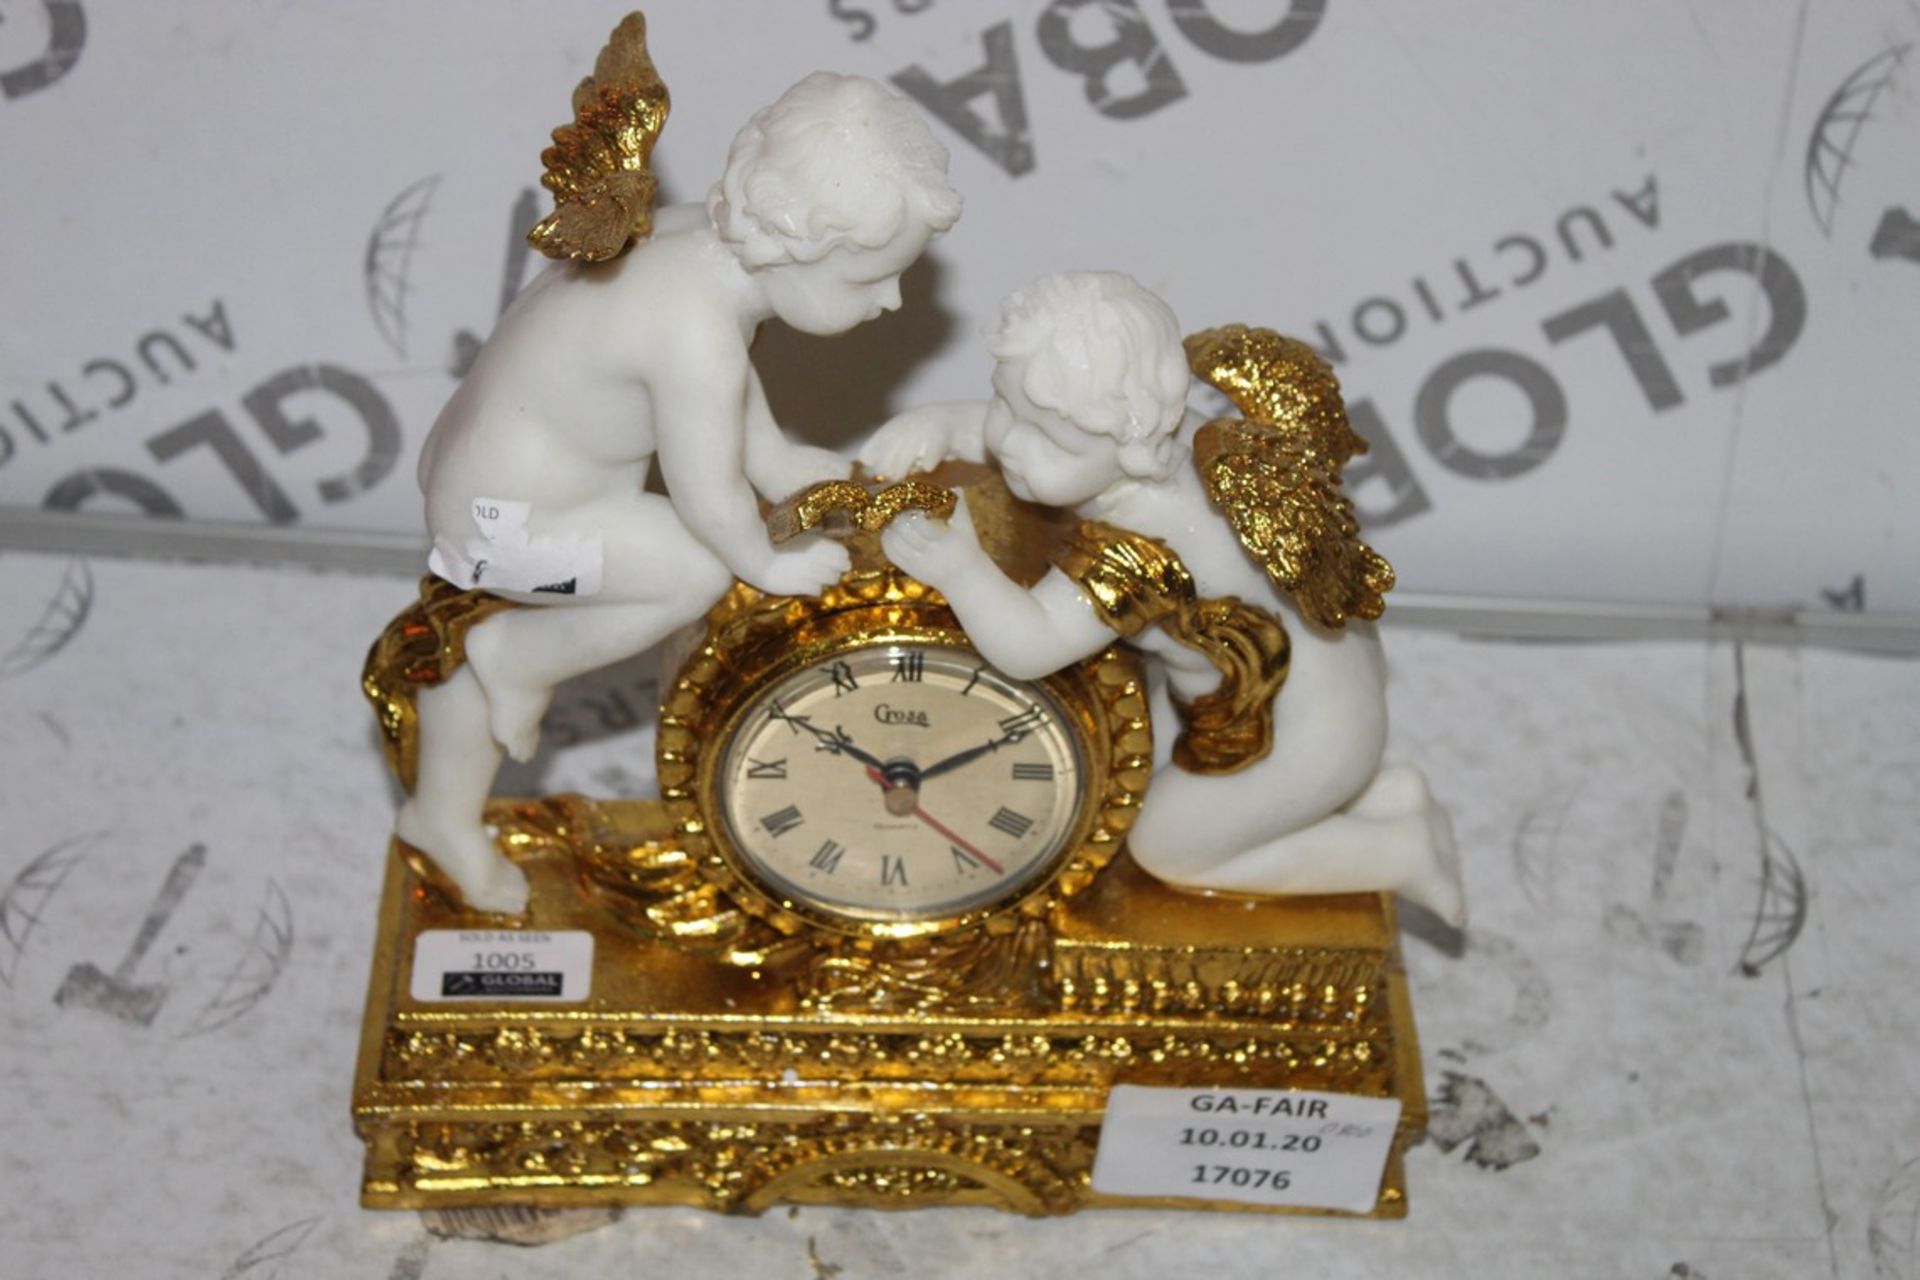 Crosa Gold Plated Cherub Mantle Clock RRP £60 (17076) (Public Viewing and Appraisals Available)